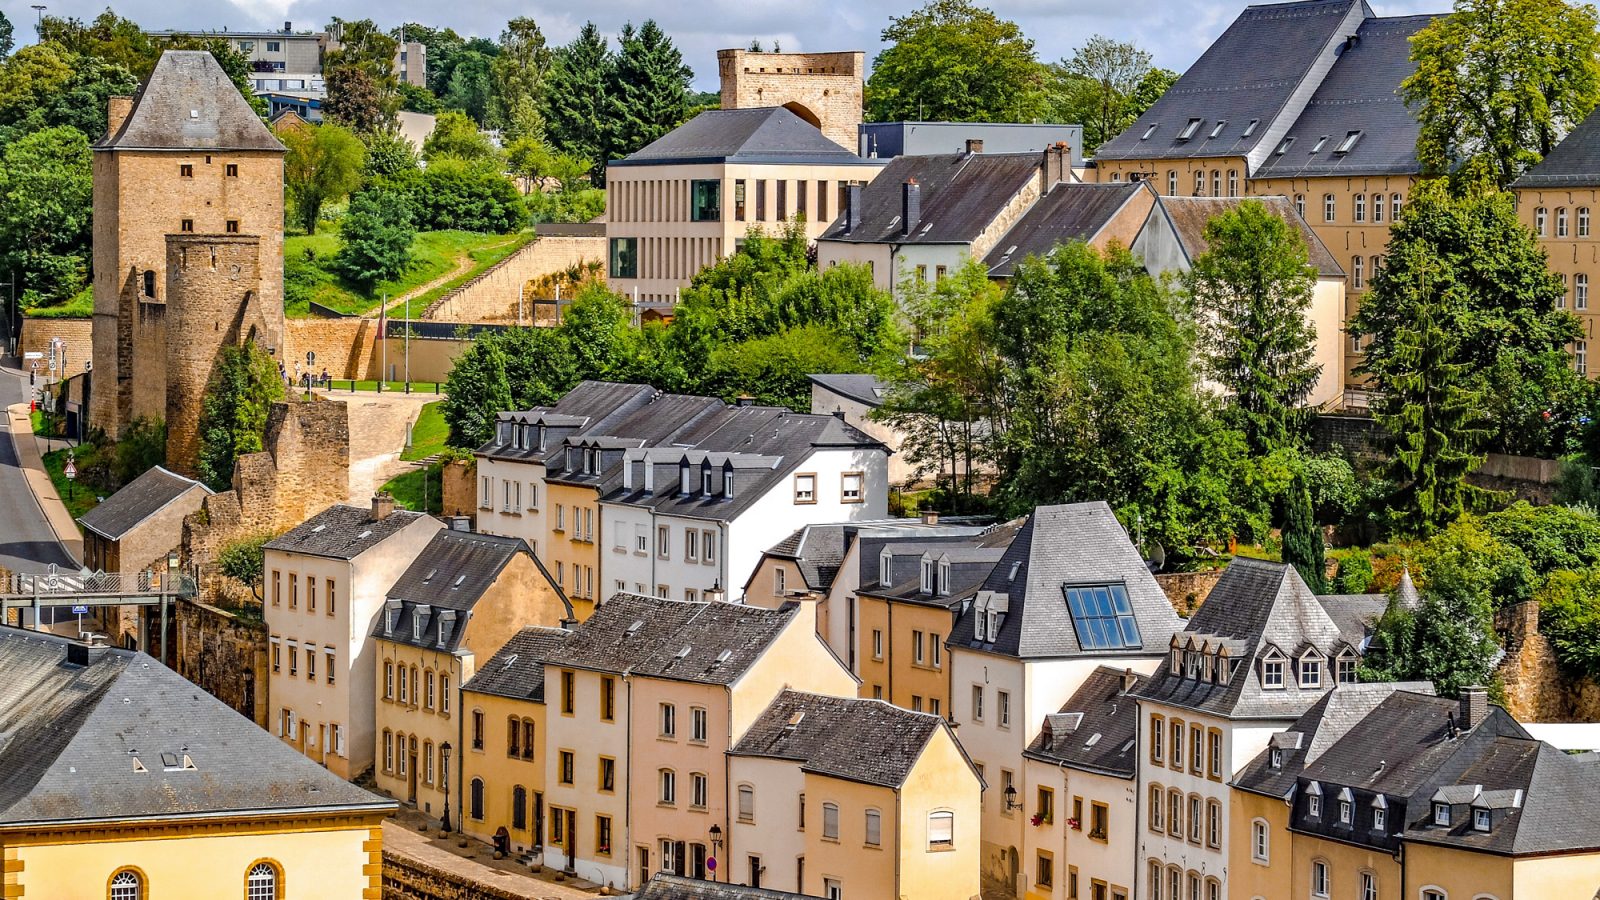 Get to know luxembourg | Where to stay in luxembourg, what to pack for luxembourg, and what you need to know about luxembourg | #timebudgettravel #traveltips #luxembourg